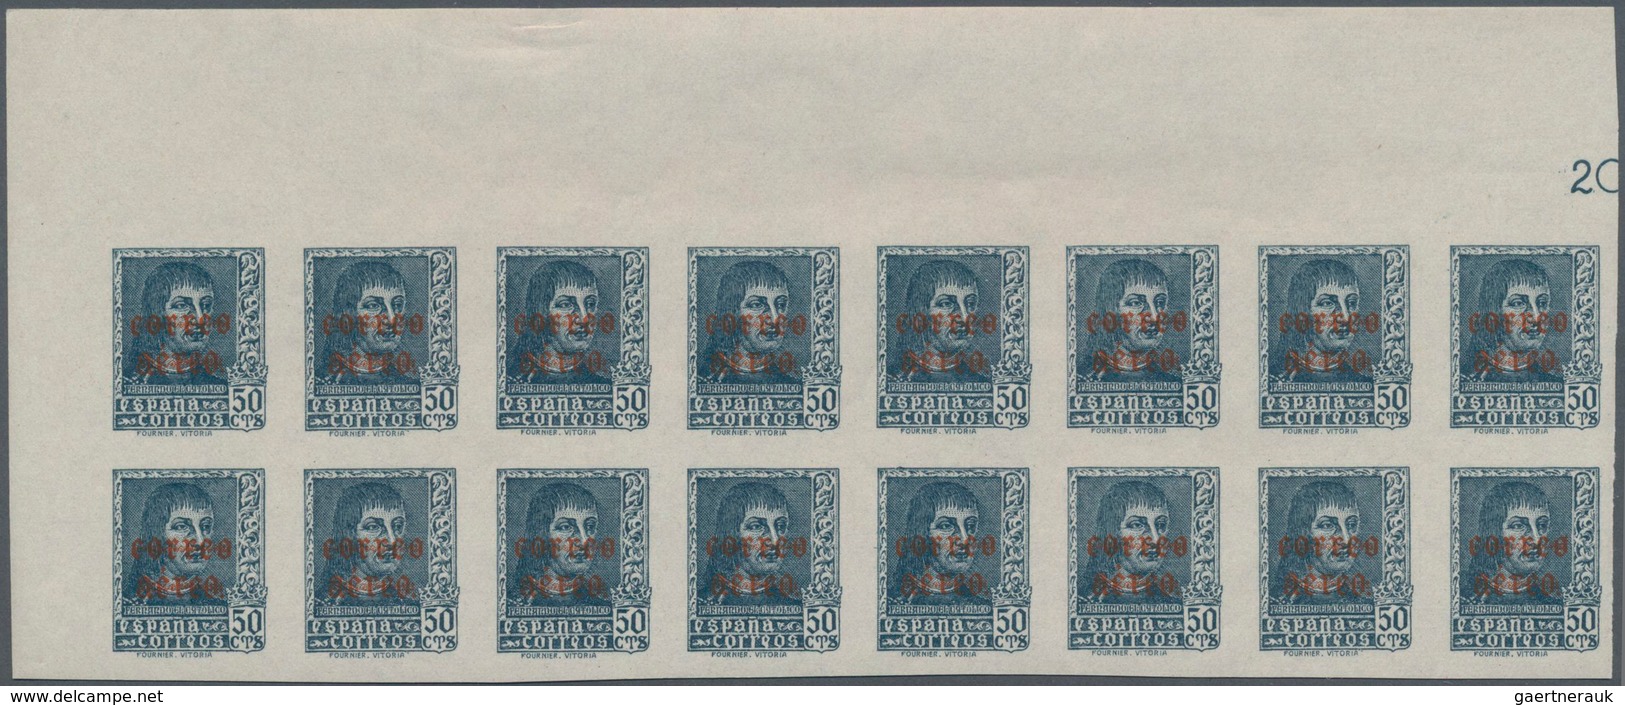 Spanien: 1938, Airmails 50c. Slate And 1pts. Blue, IMPERFORATED Marginal Blocks Of 16 From The Upper - Used Stamps